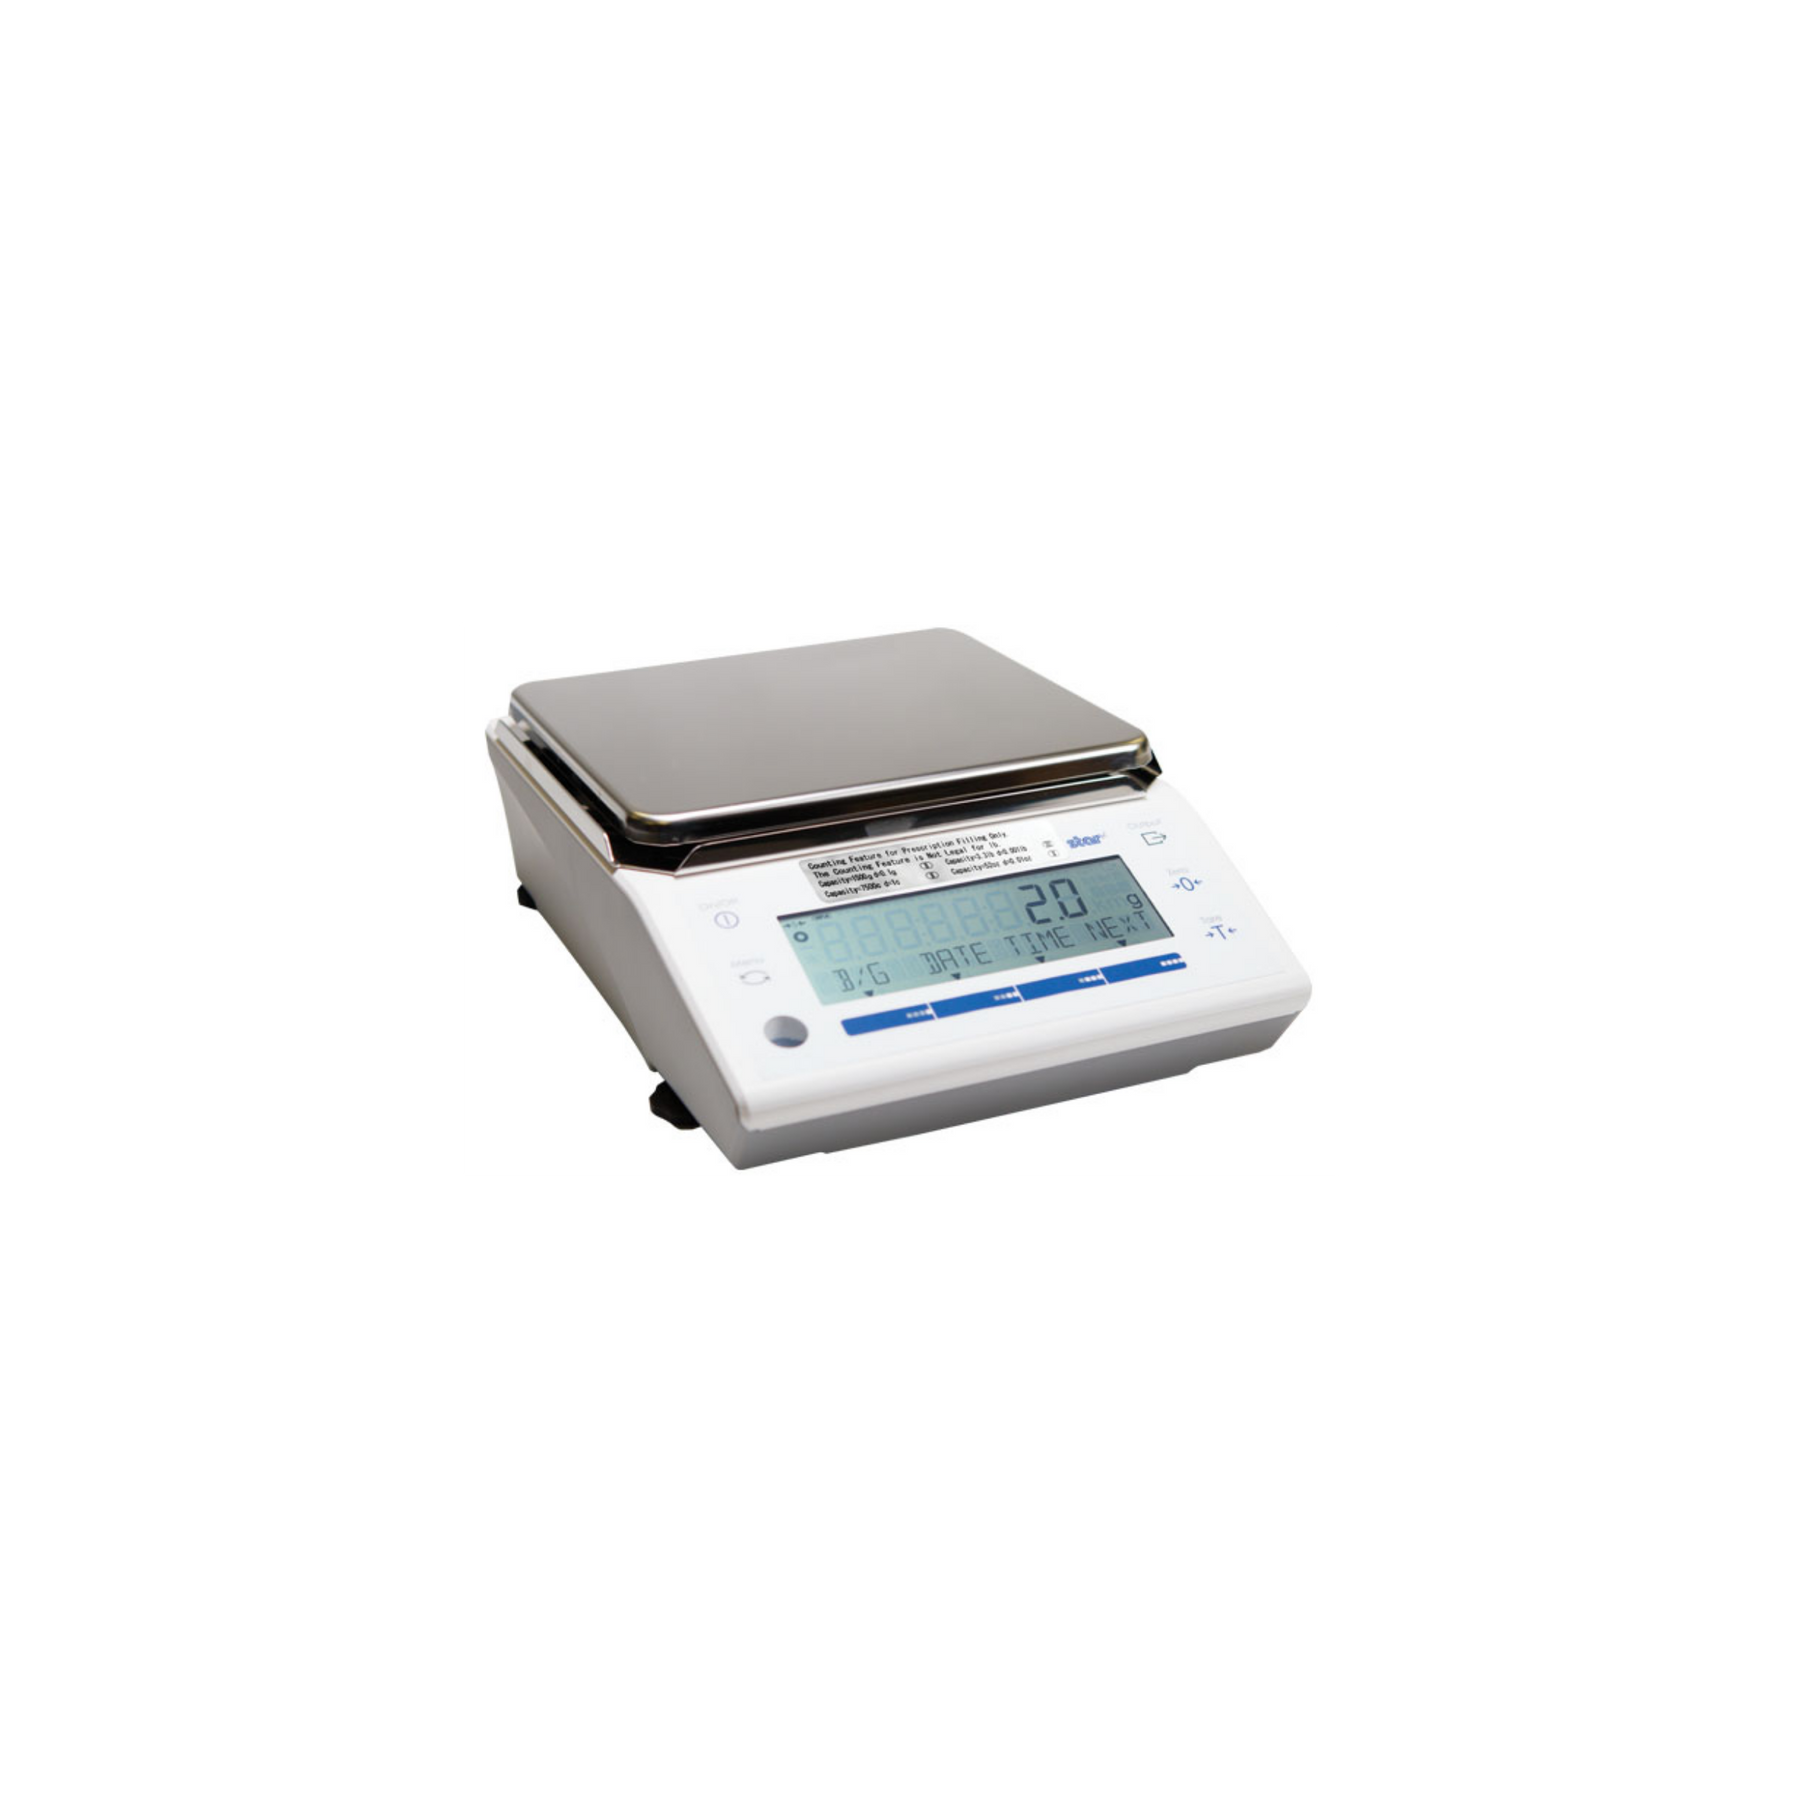 Star Micronics MG-S1501 Scale, USB, BLE, Legal For Trade In US (NTEP), 1500 G X 0.1G - Class Ii (G, Oz) Class Iii (Lbs), AC Adapter USB Cable Included, NCNR